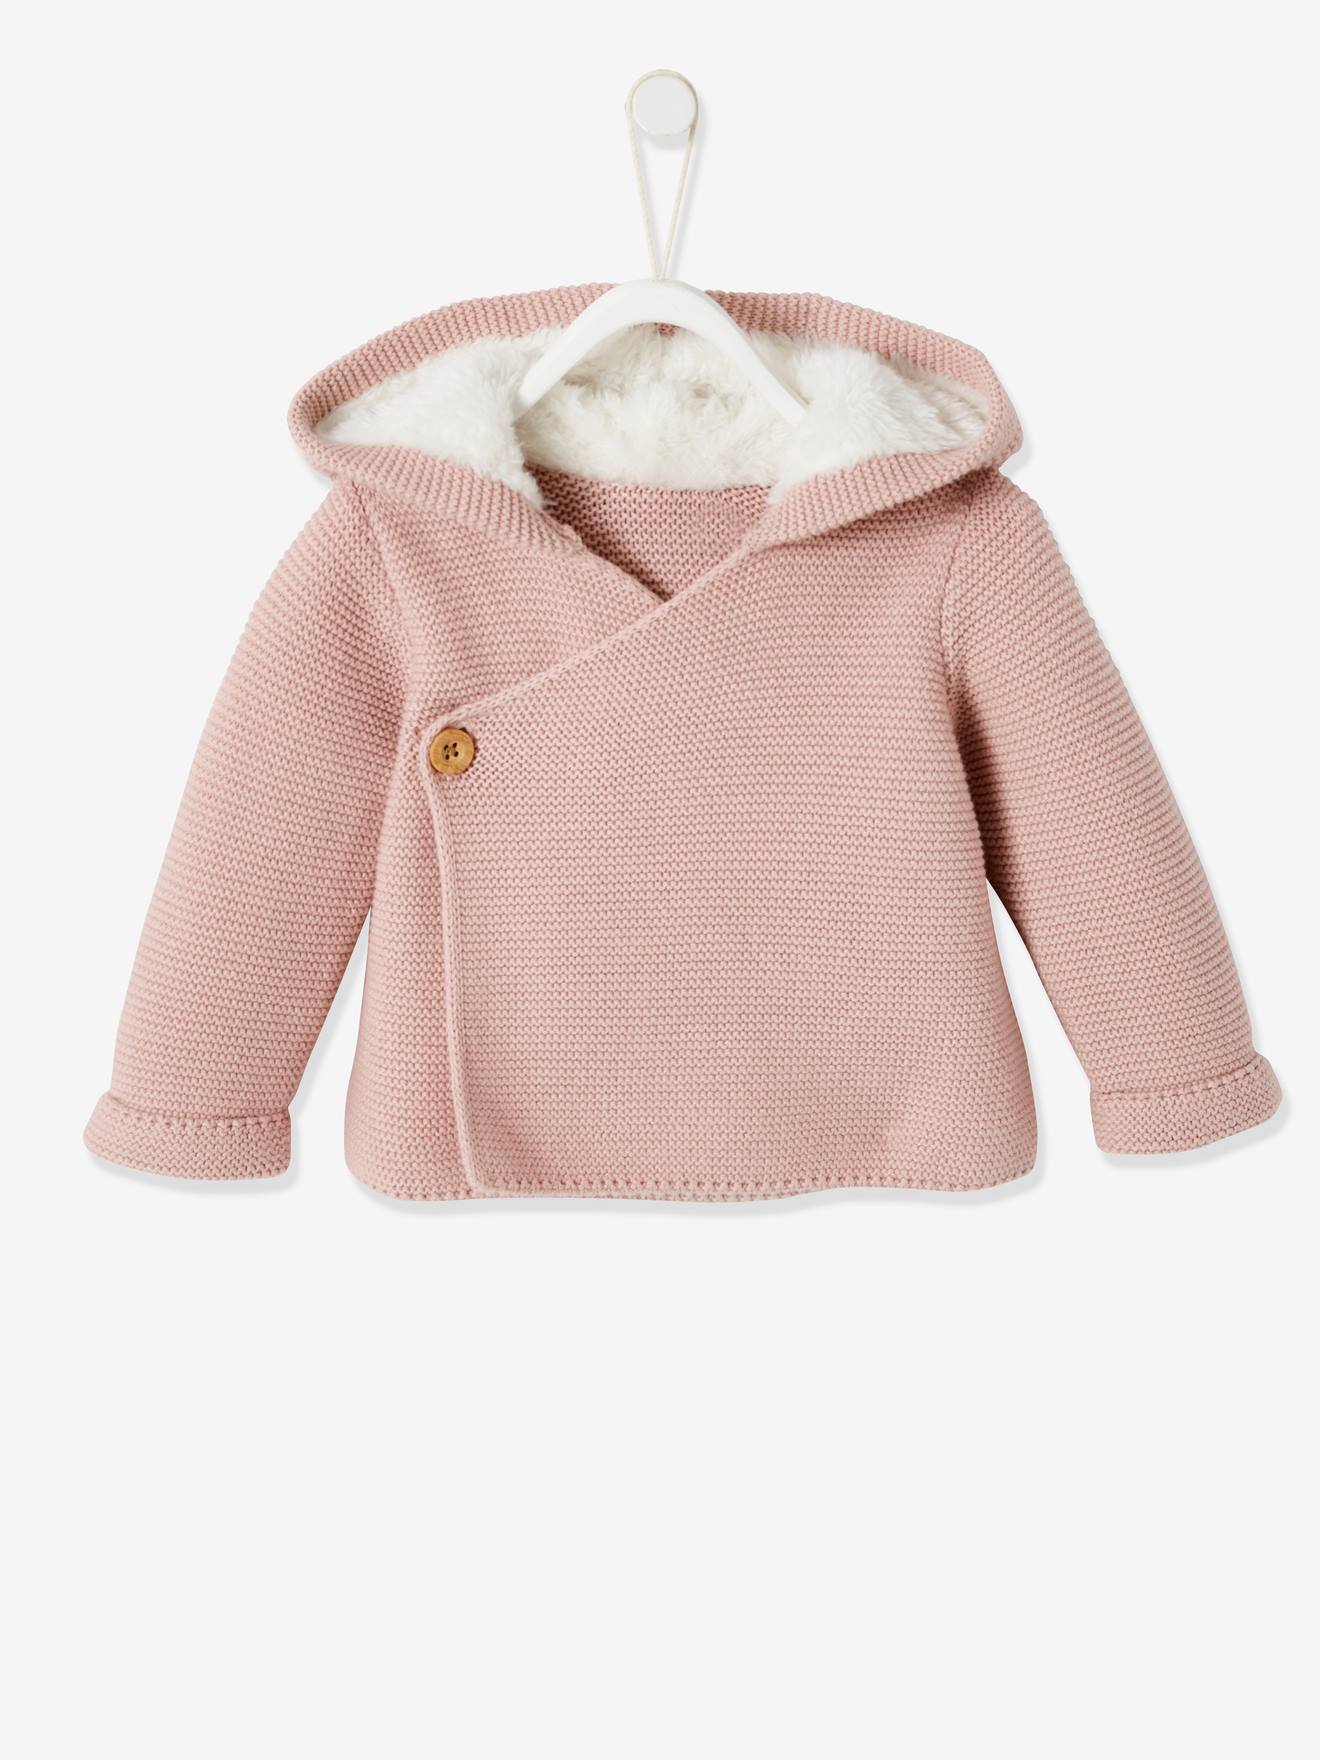 Hooded Cardigan for Babies, Faux Fur Lining light pink